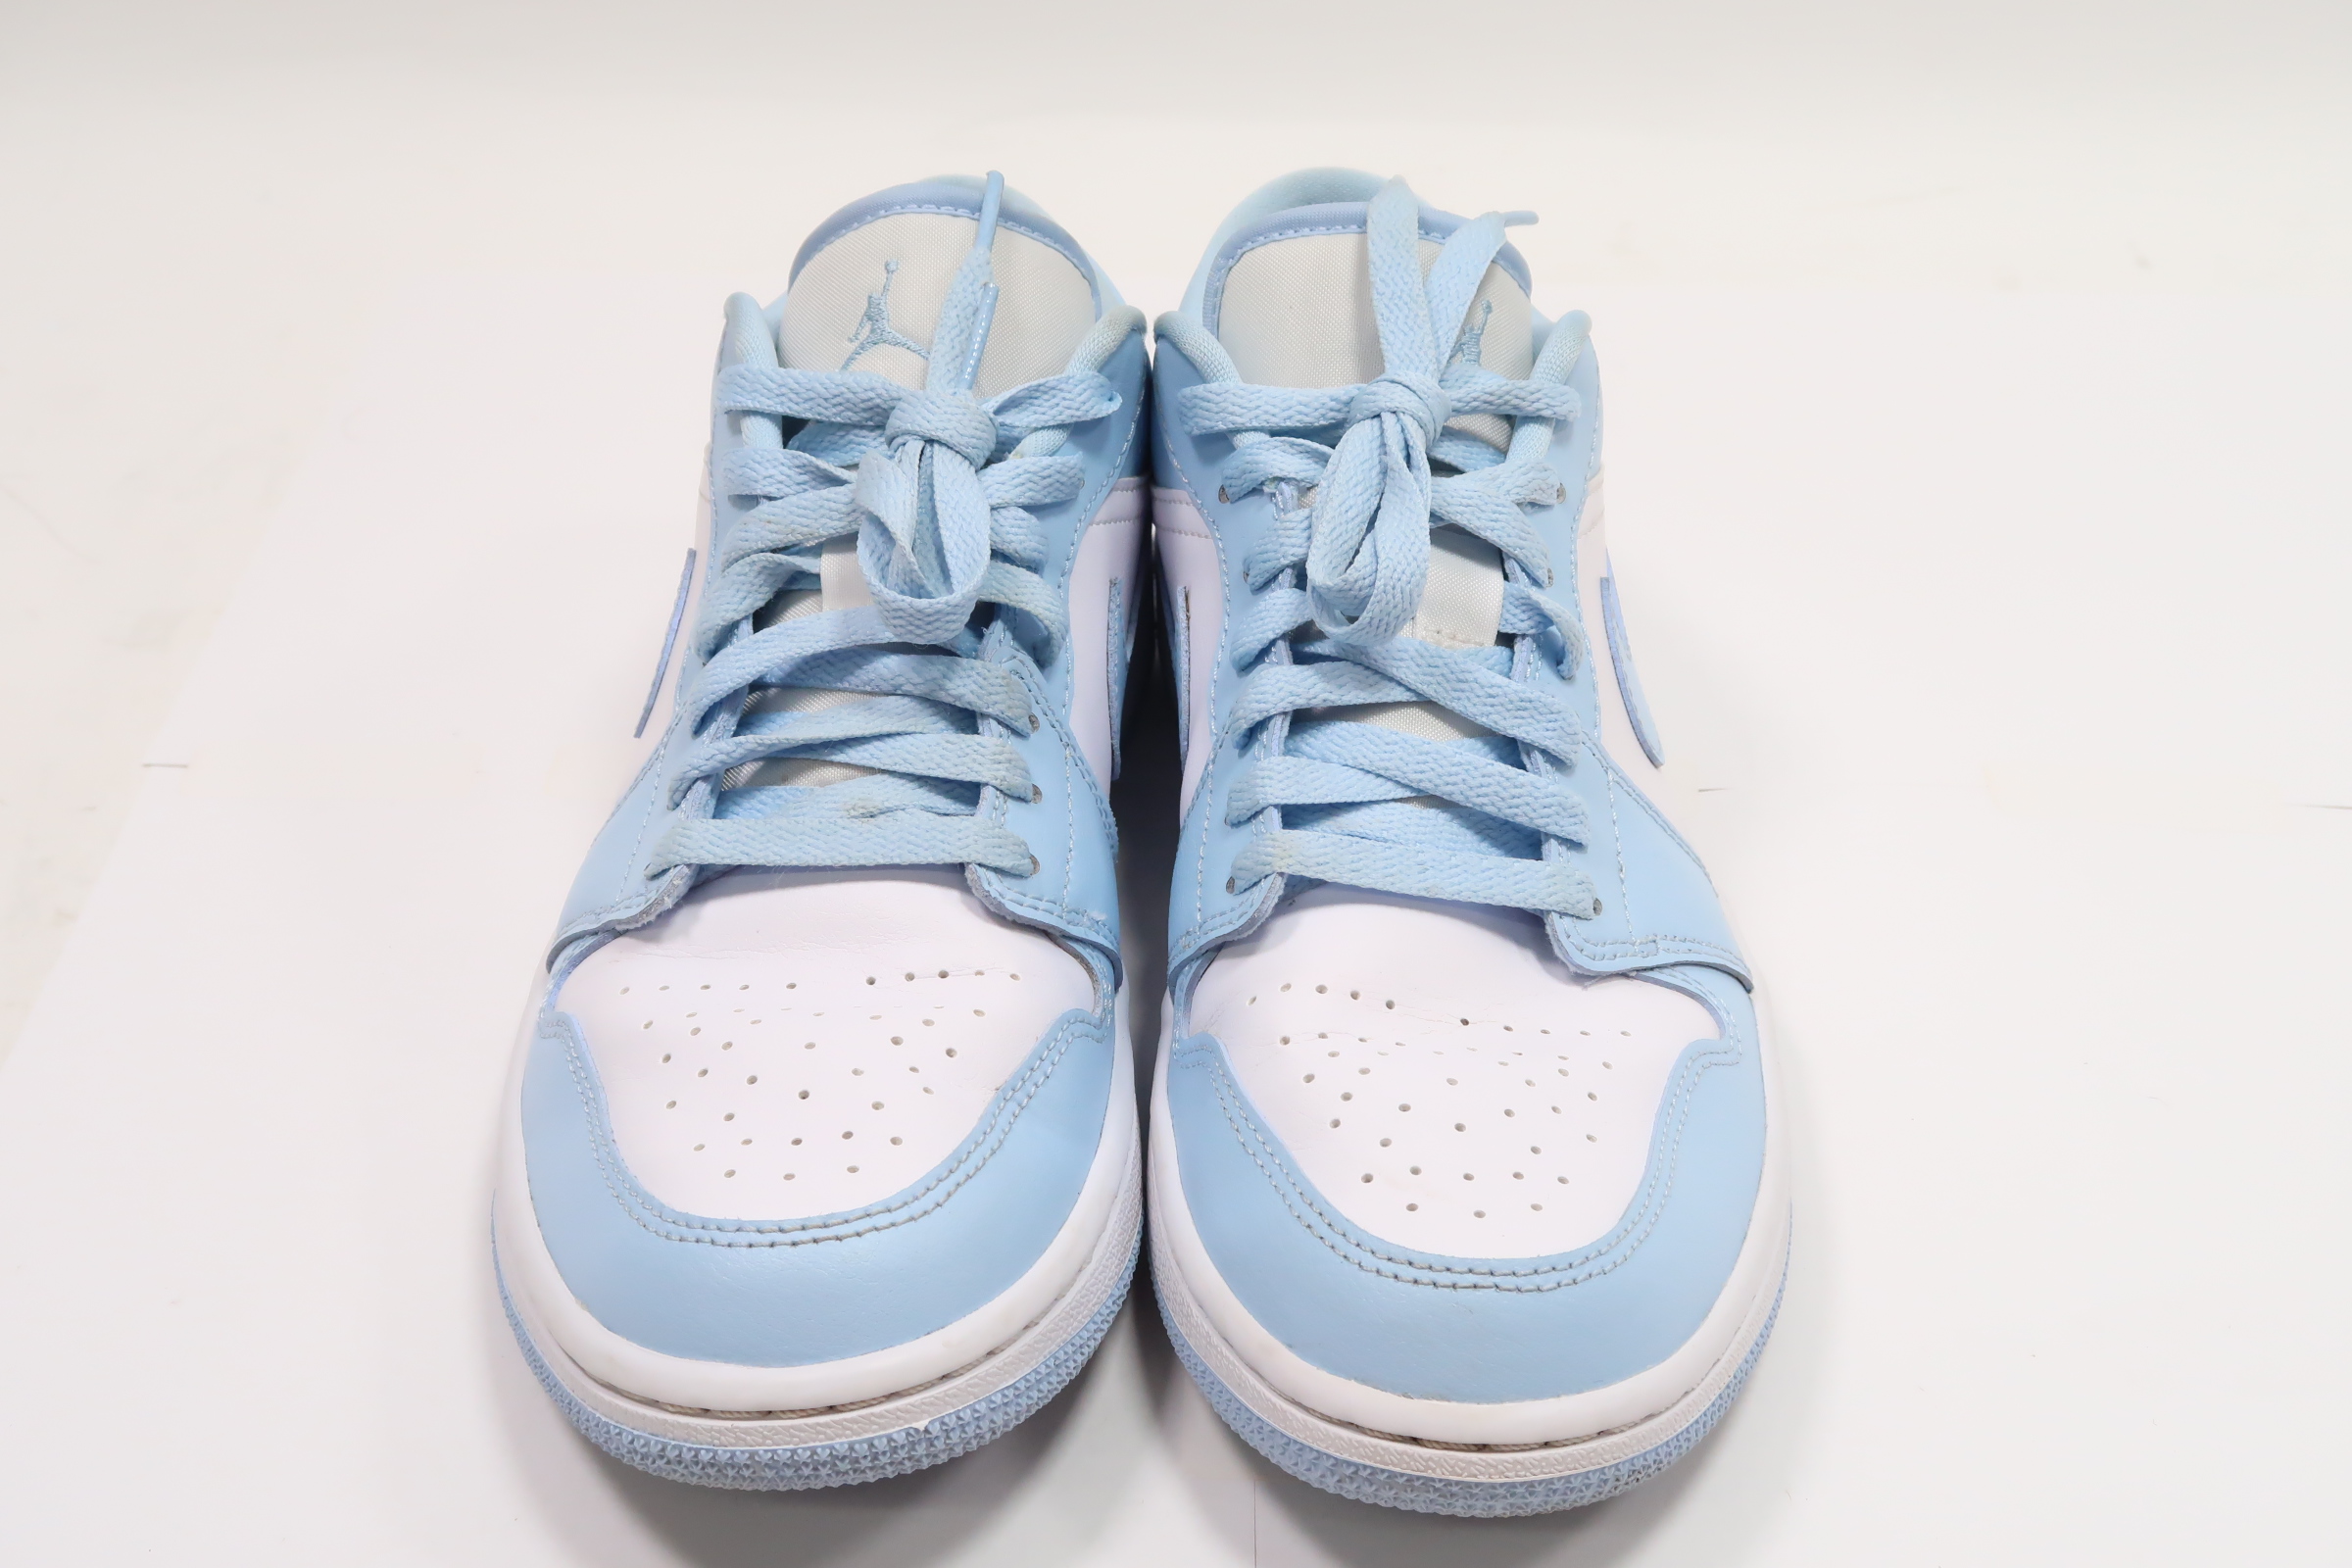 Nike Women Air Force 1 6 IN Boot White / Ice Blue 314389-141 Deadstock